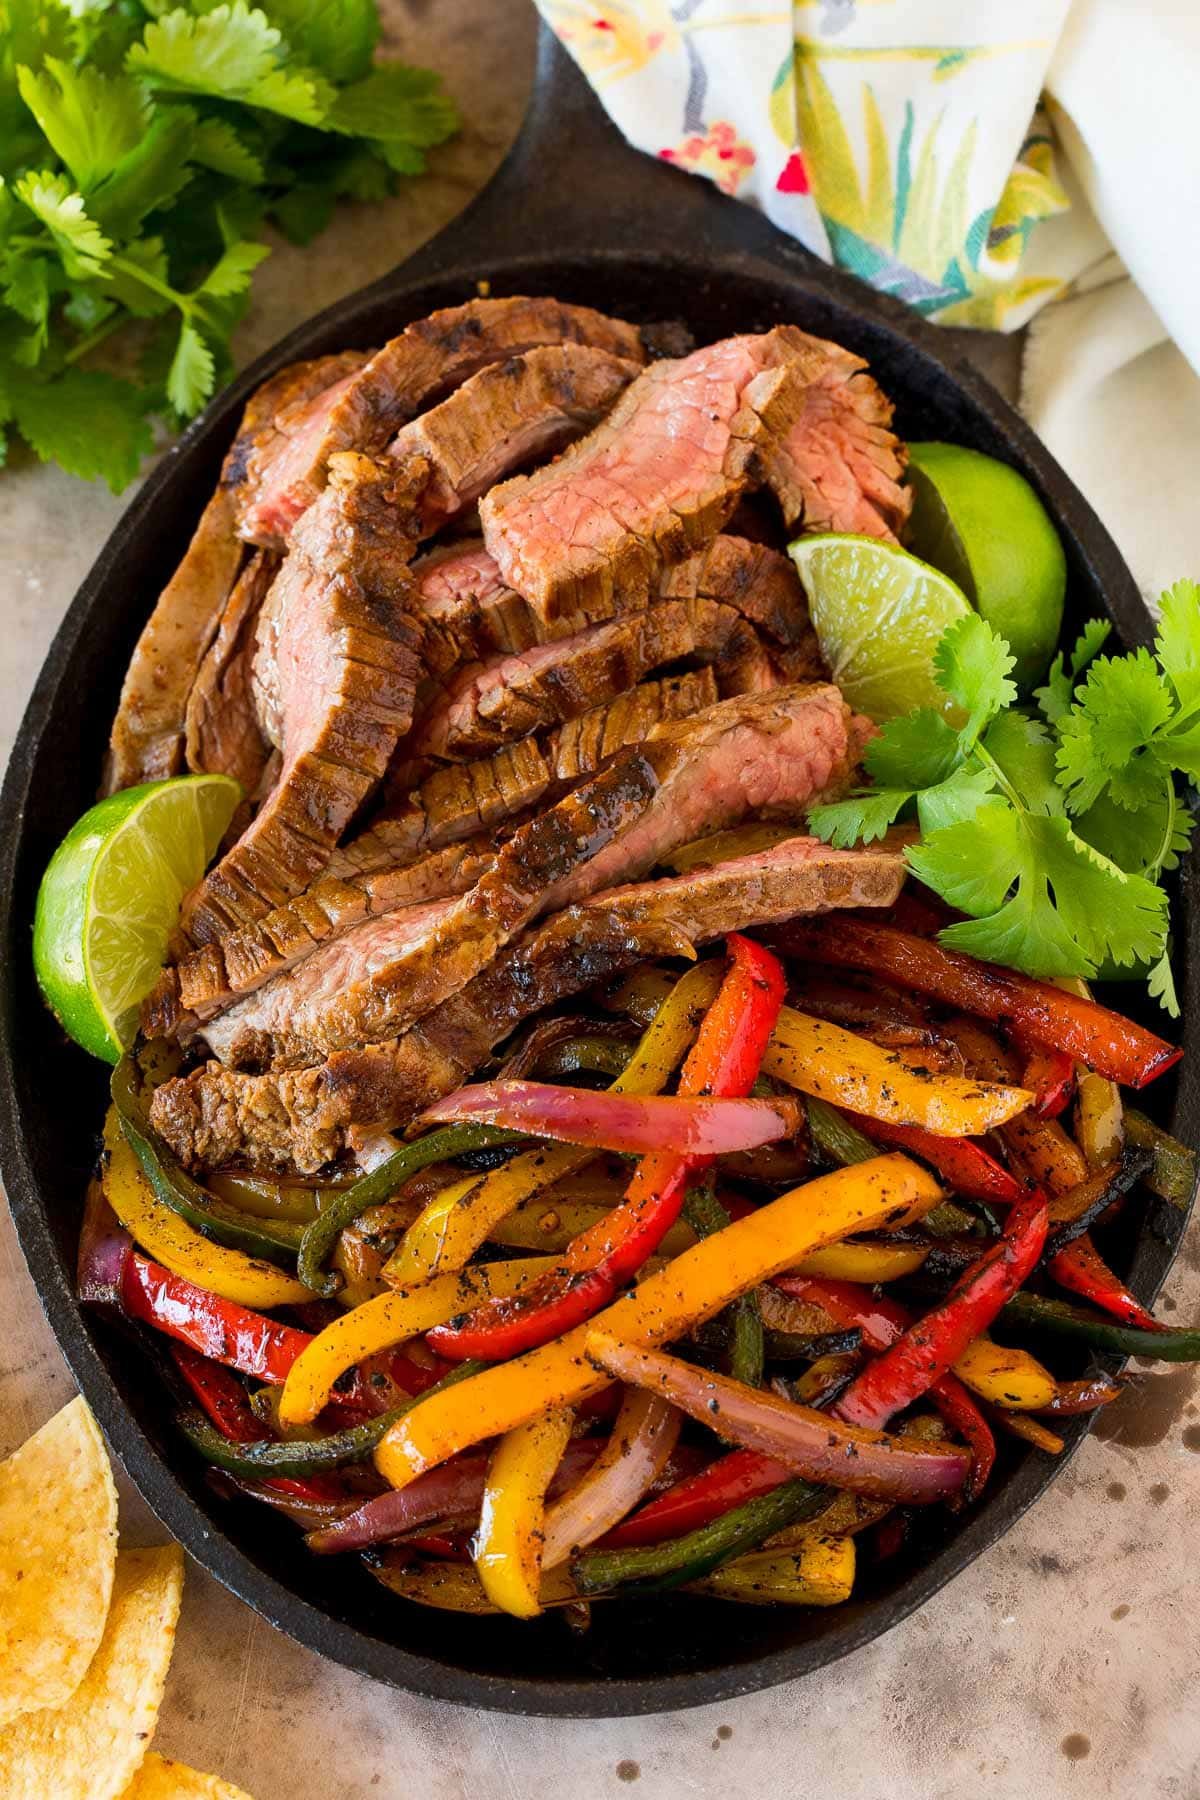 Steak fajita marinade coated meat and peppers in a cast iron pan.